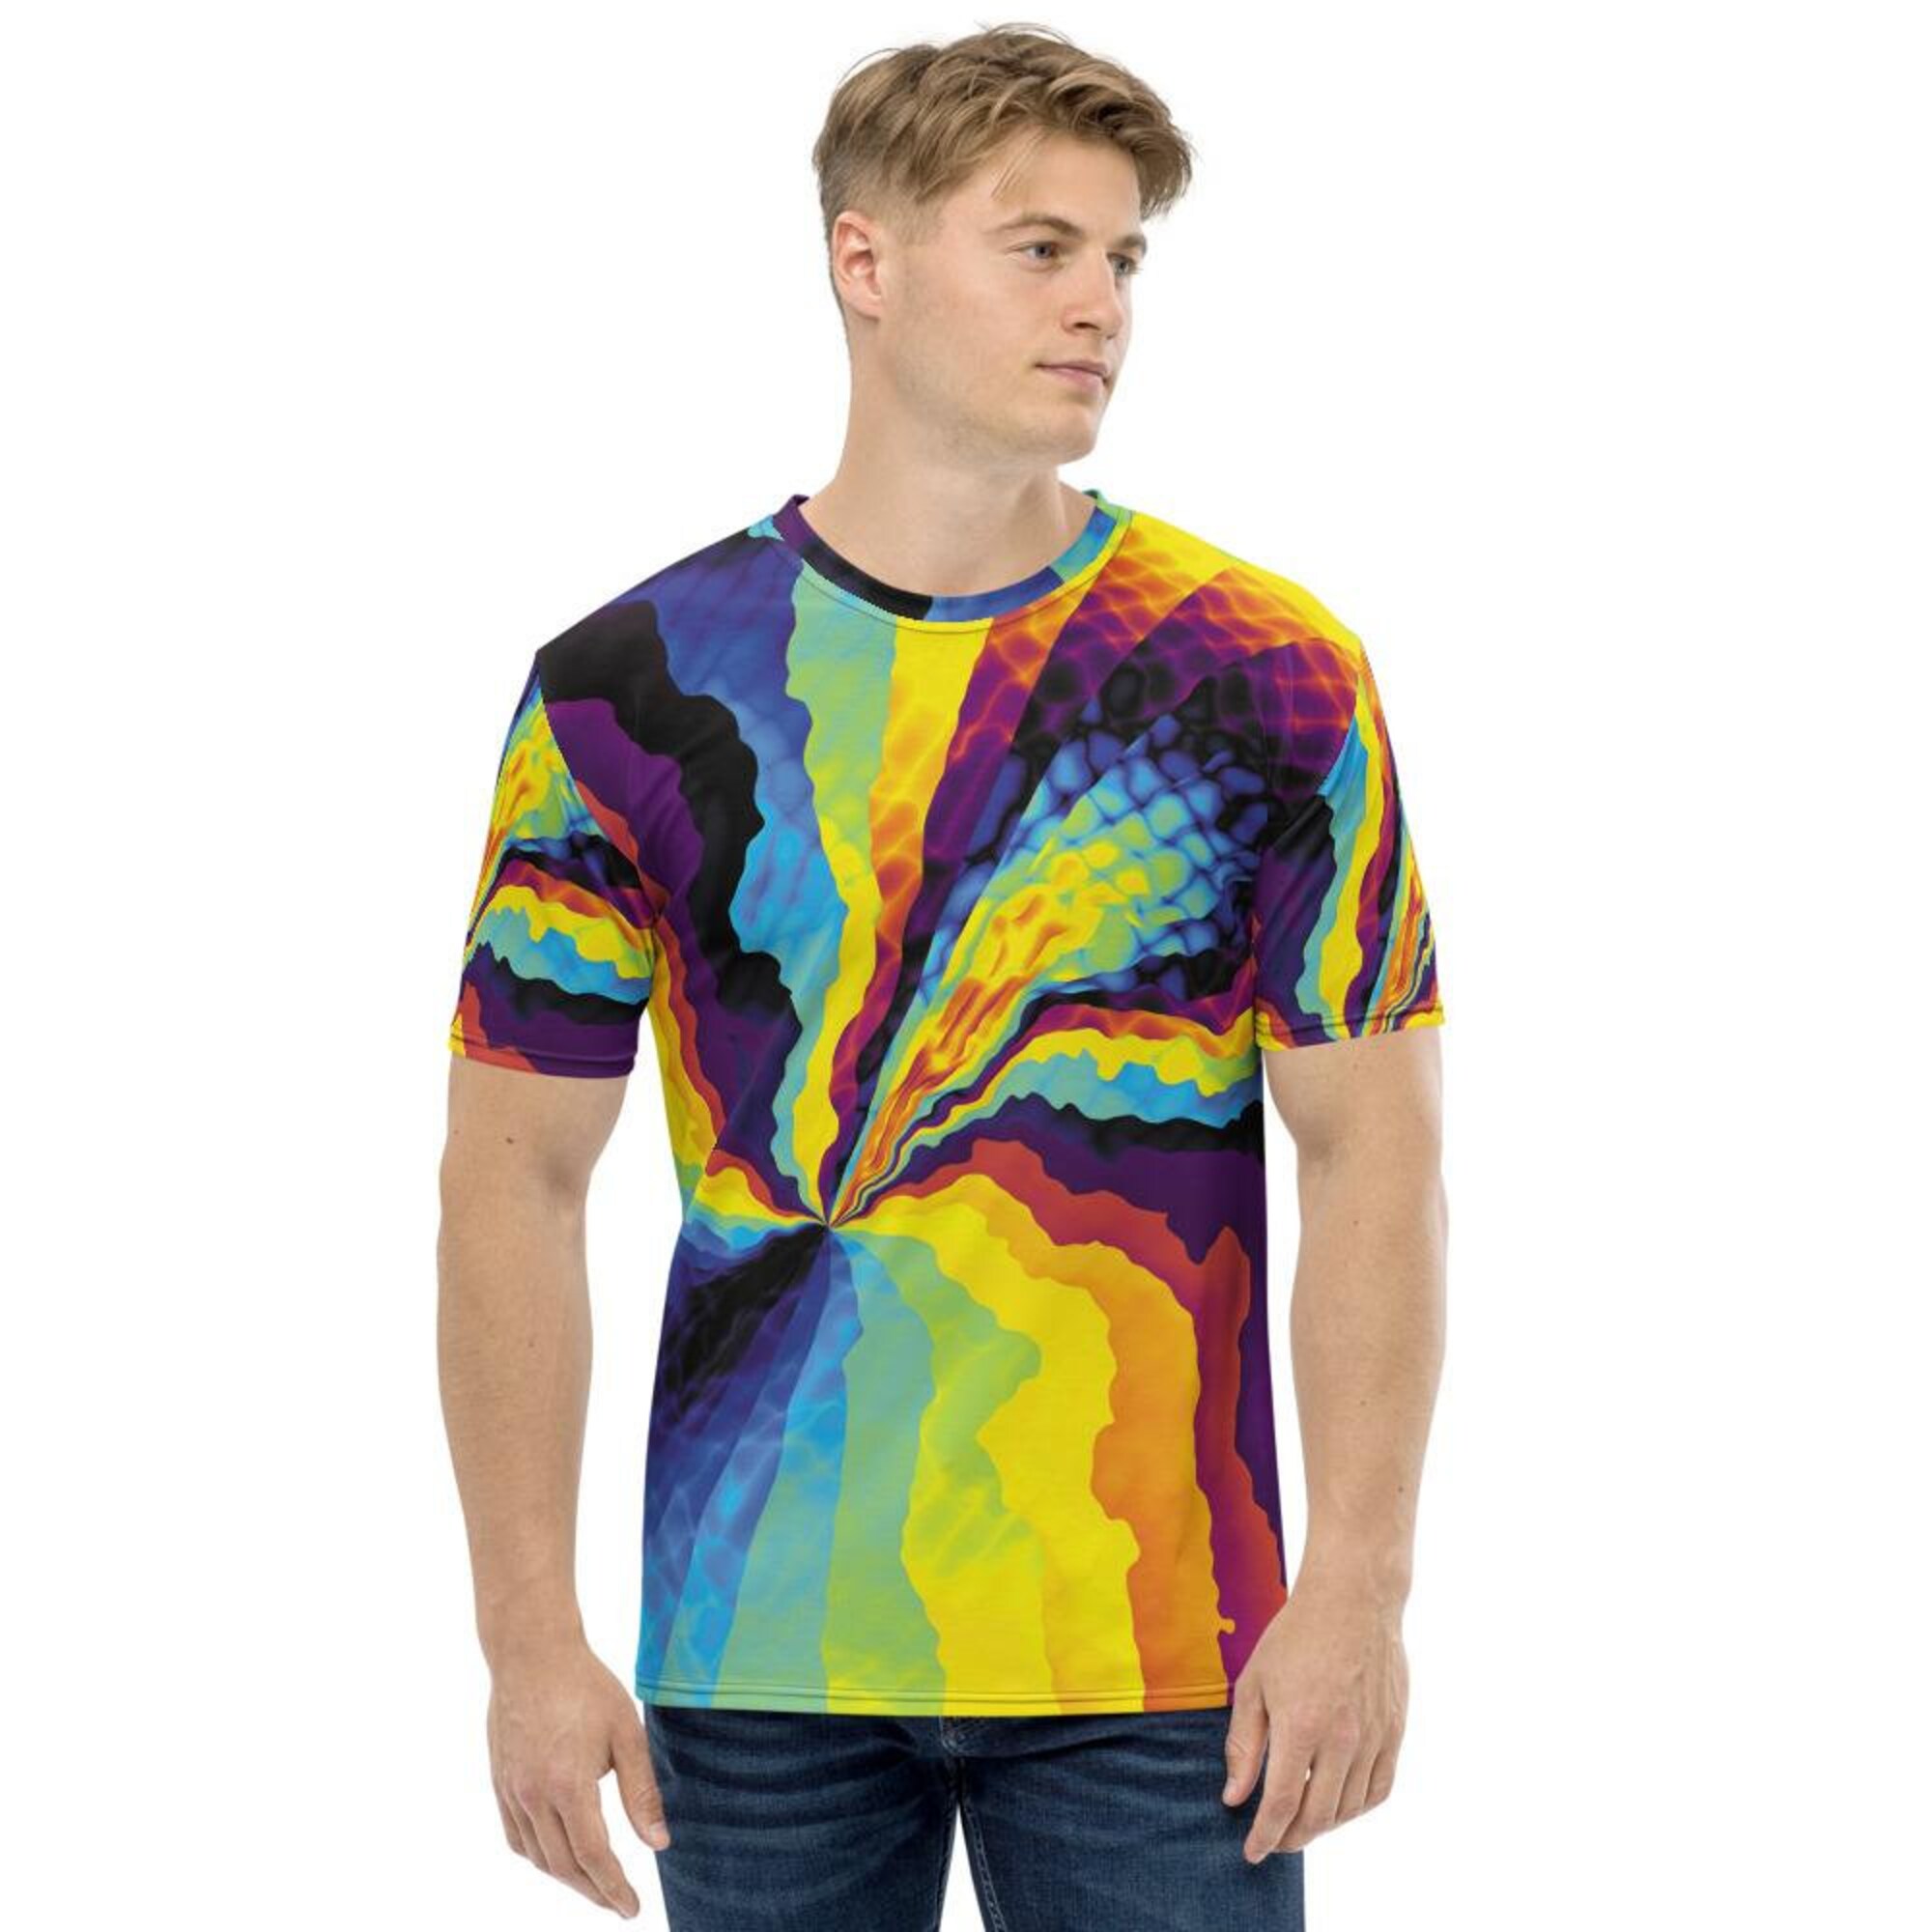 Discover Colorful Psychedelic Rainbow Pinch Swirl Trippy 3D T Shirt